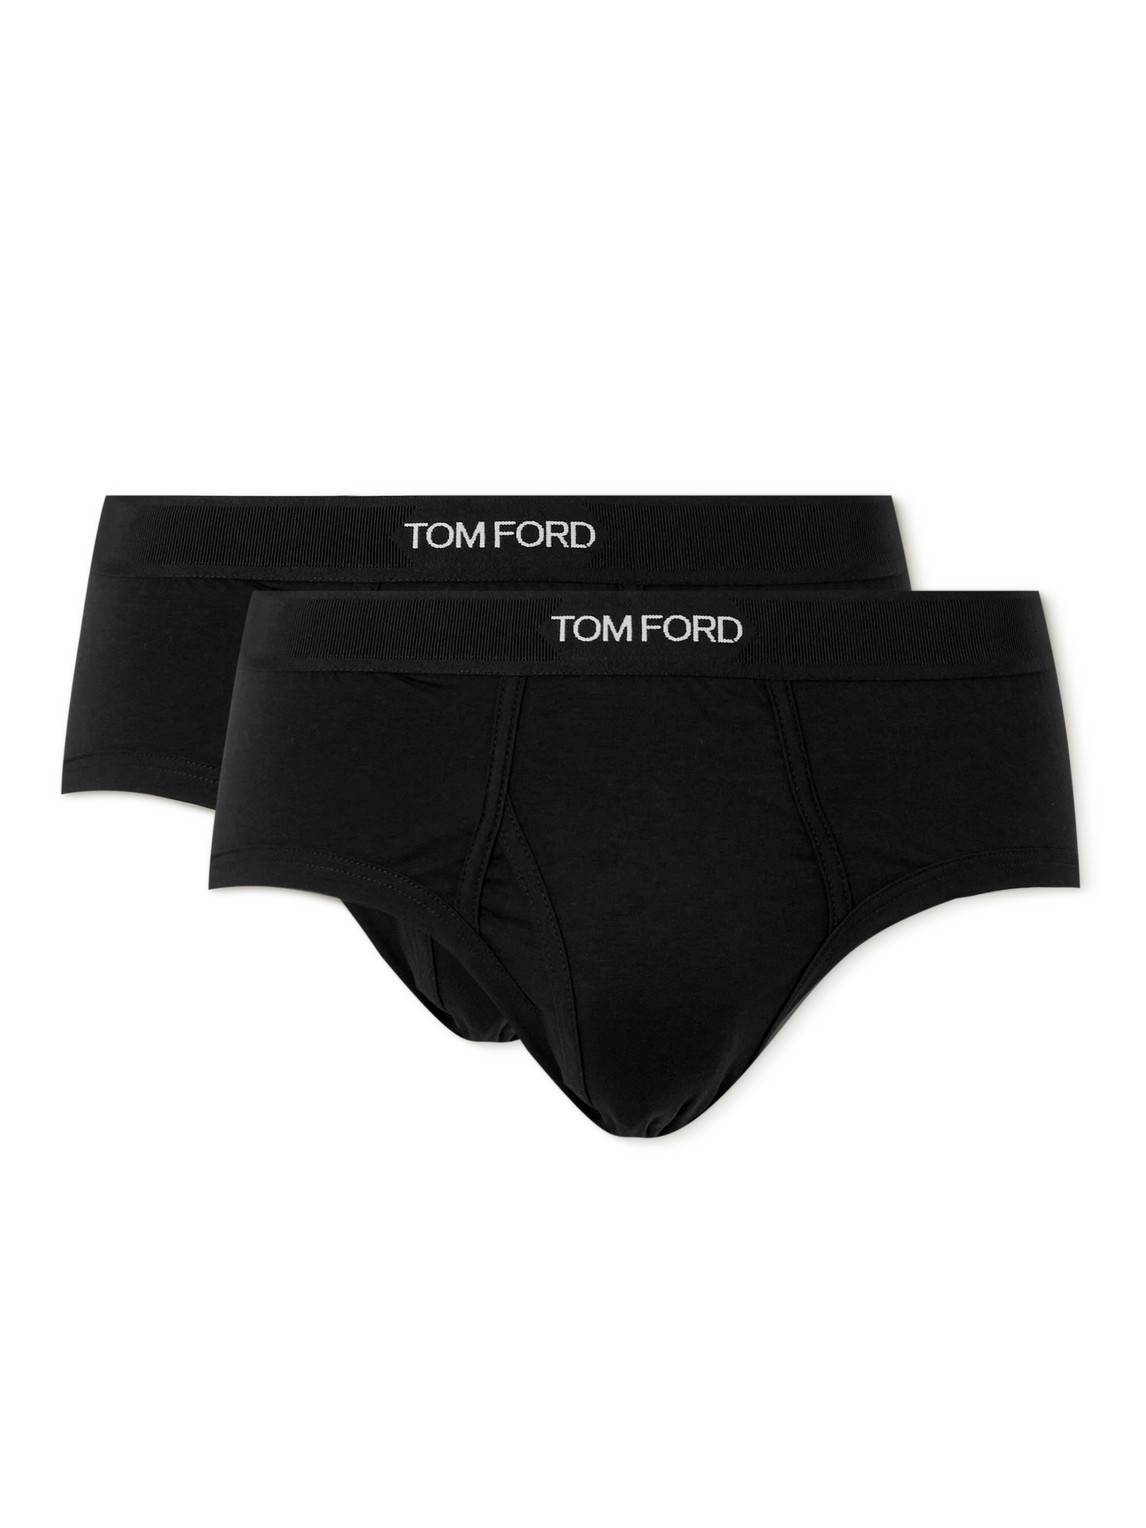 TOM FORD - Two-Pack Stretch-Cotton and Modal-Blend Briefs - Men - Black - L von TOM FORD